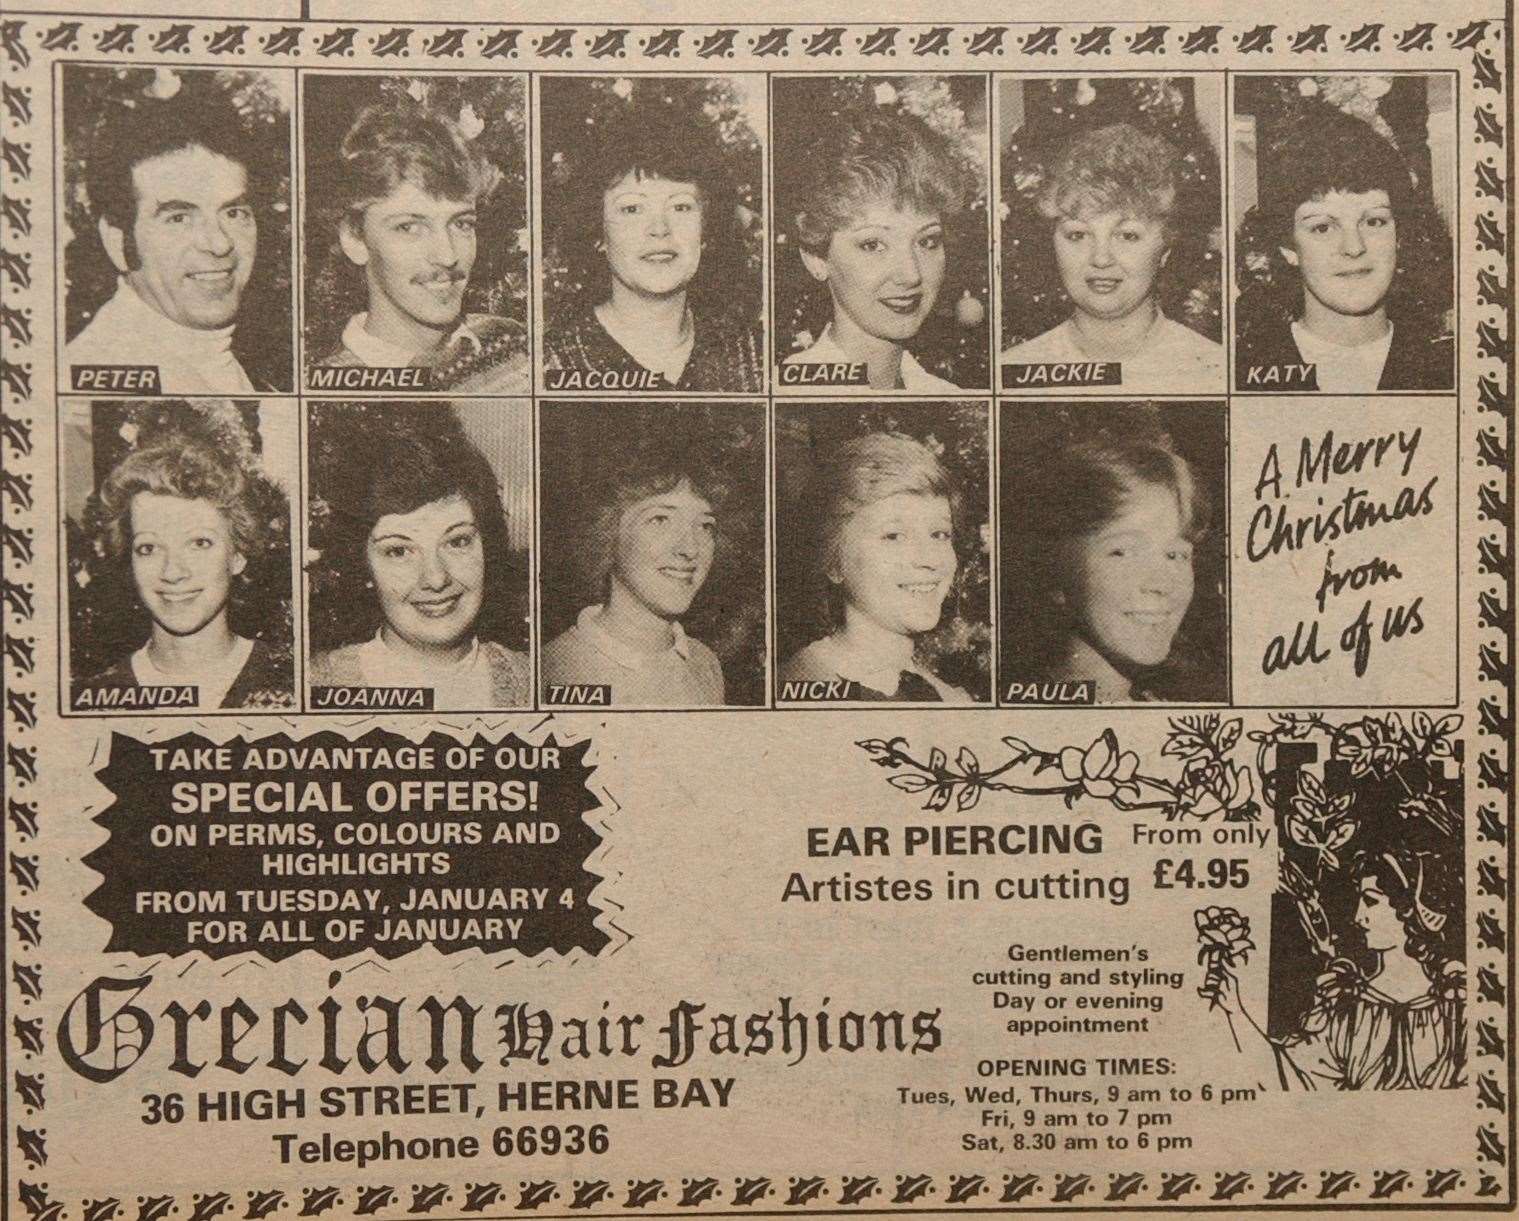 Special offer on perms at Grecian Hair Fashions in a 1982 Herne Bay Gazette advert